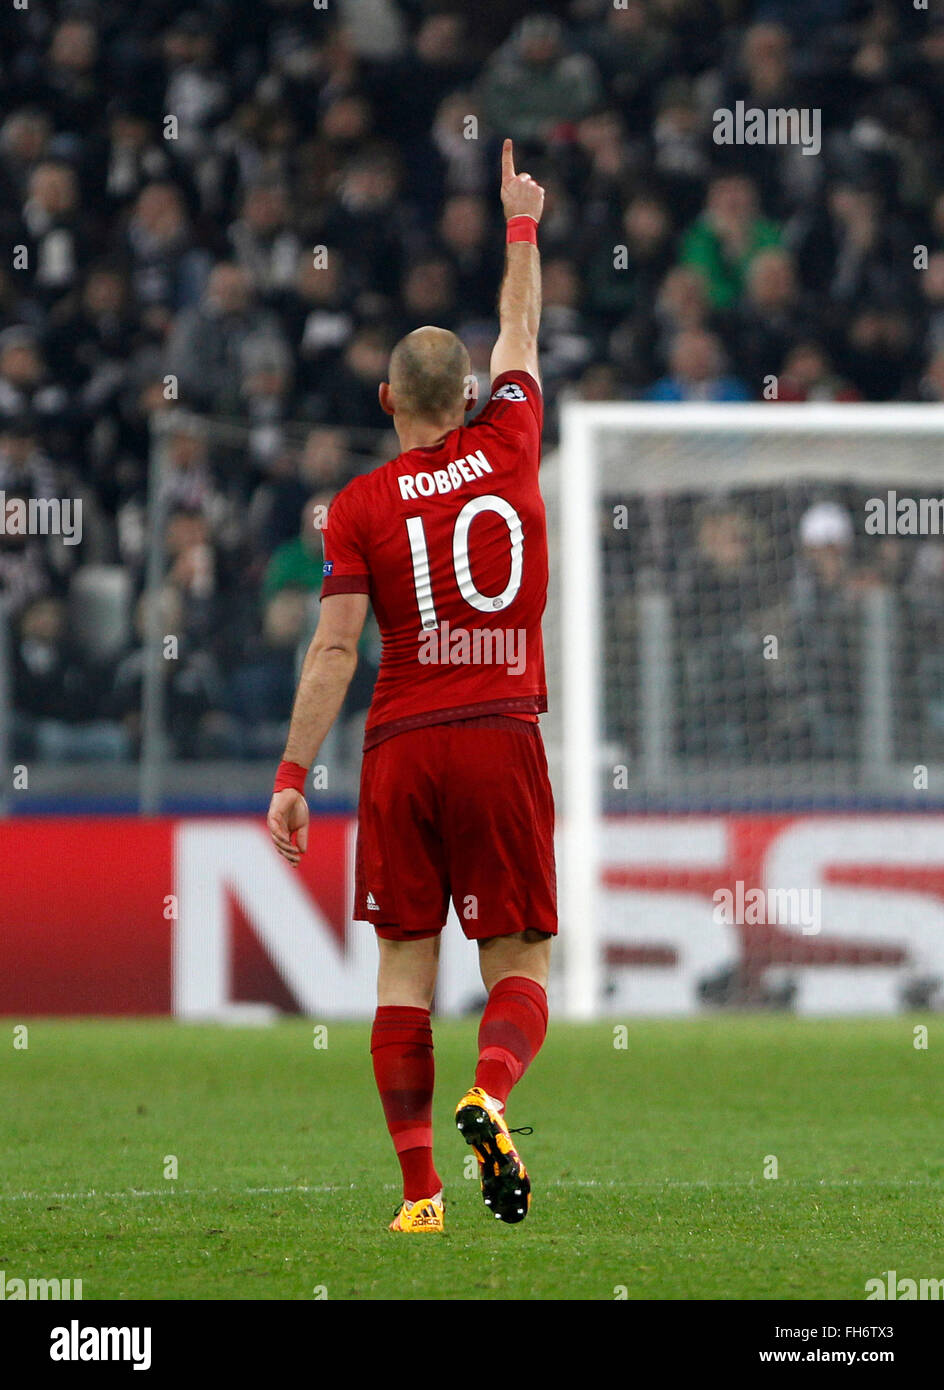 Bayern’s Arjen Robben celebrates after scoring during the Champions League first leg round of 16 football match between Juventus and Bayern at the Juventus Stadium. The game ended 2-2. (Photo by Riccardo de Luca / Pacific Press) Stock Photo